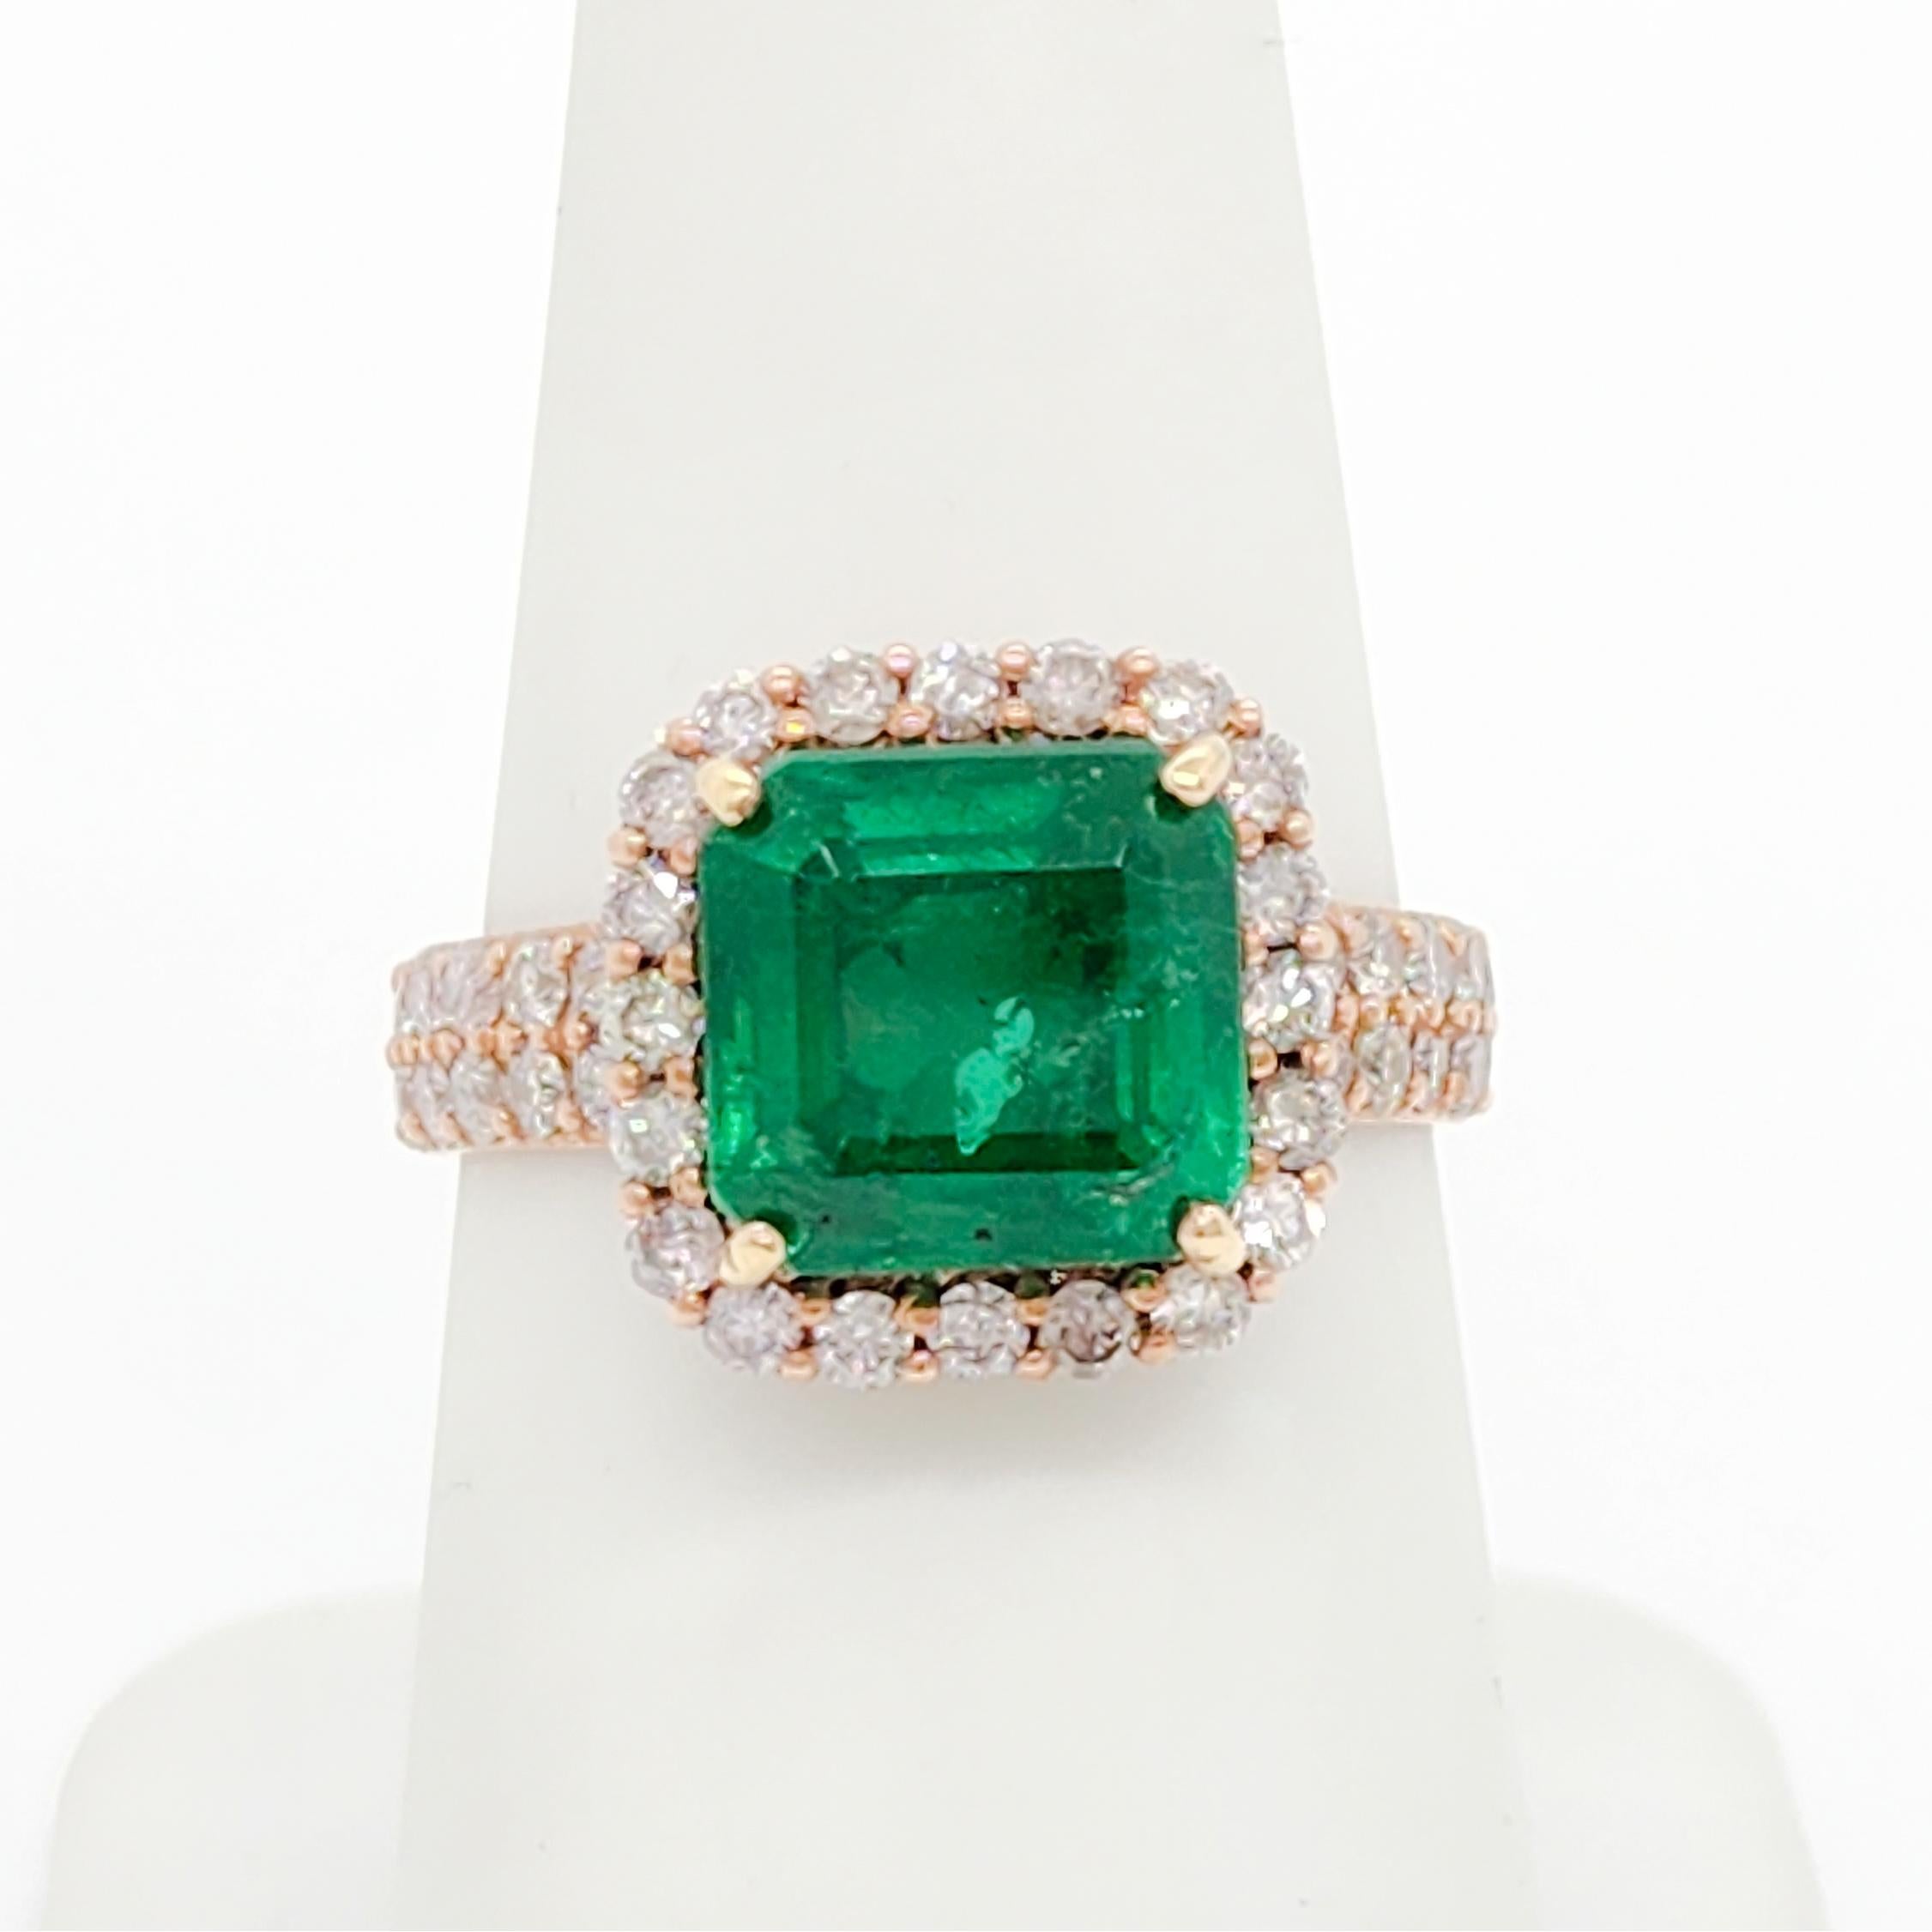 C. Dunaigre Zambian Emerald and Diamond Cocktail Ring in 18k Rose Gold For Sale 2